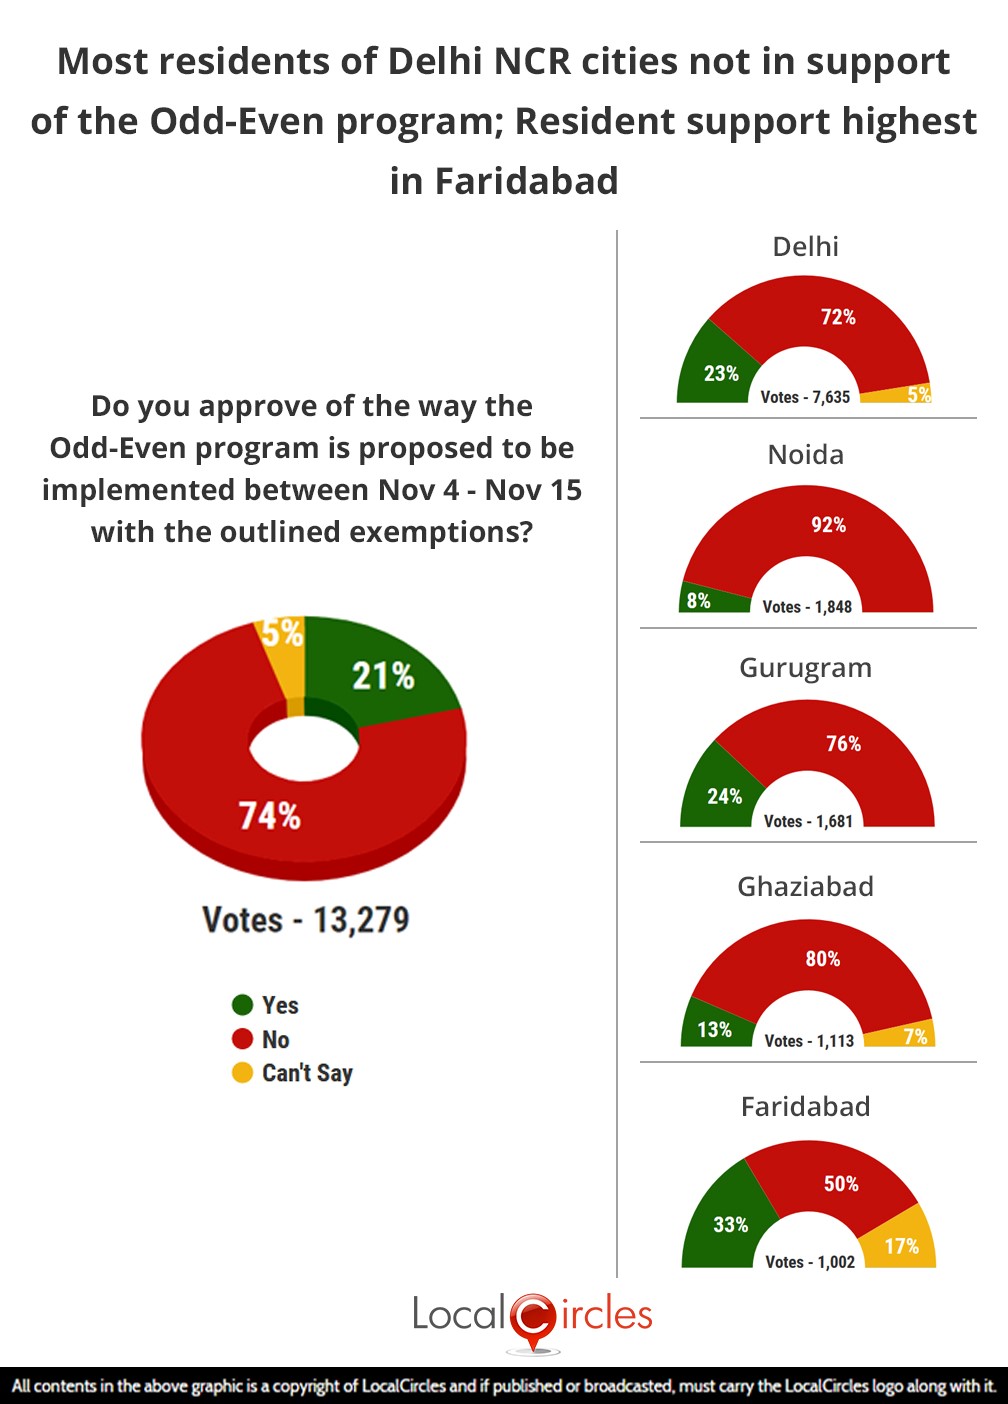 LocalCircles Poll - Most residents of Delhi NCR cities not in support of the Odd-Even program; Resident support highest in Faridabad